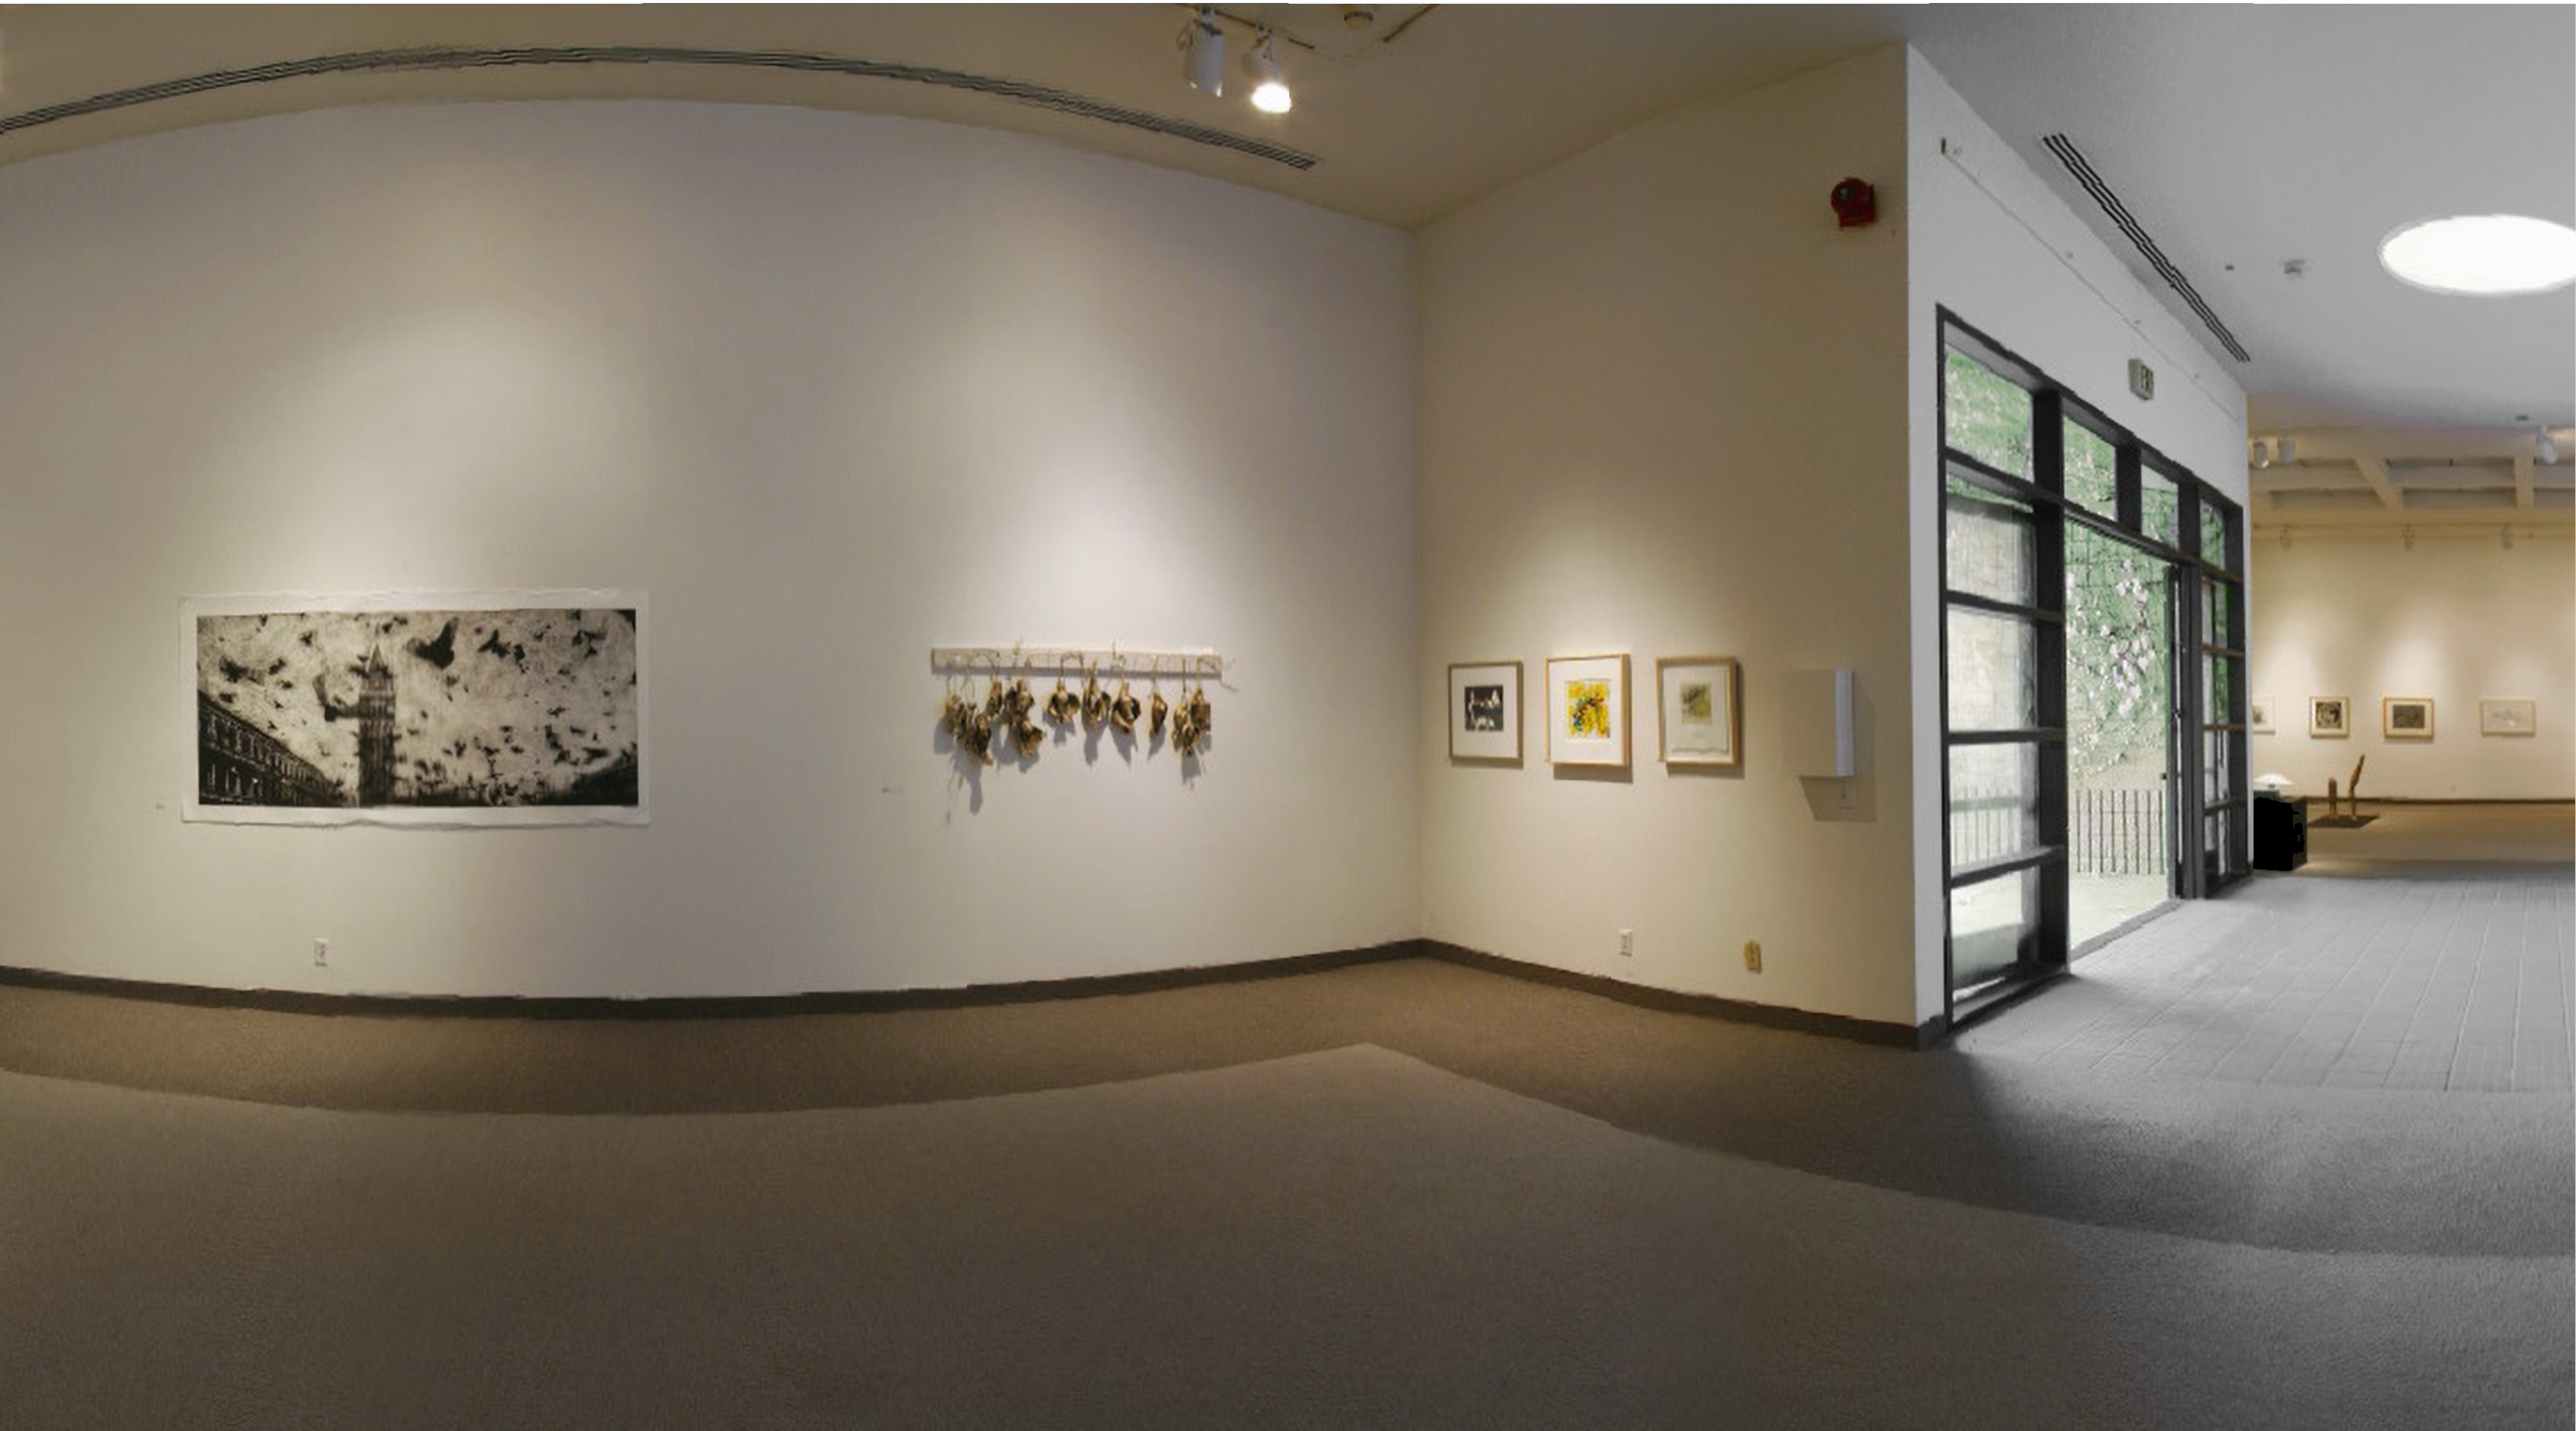 Installation View, Front West Gallery, Ink & Clay 29 Exhibition, January 06, 2003 to February 14, 2003